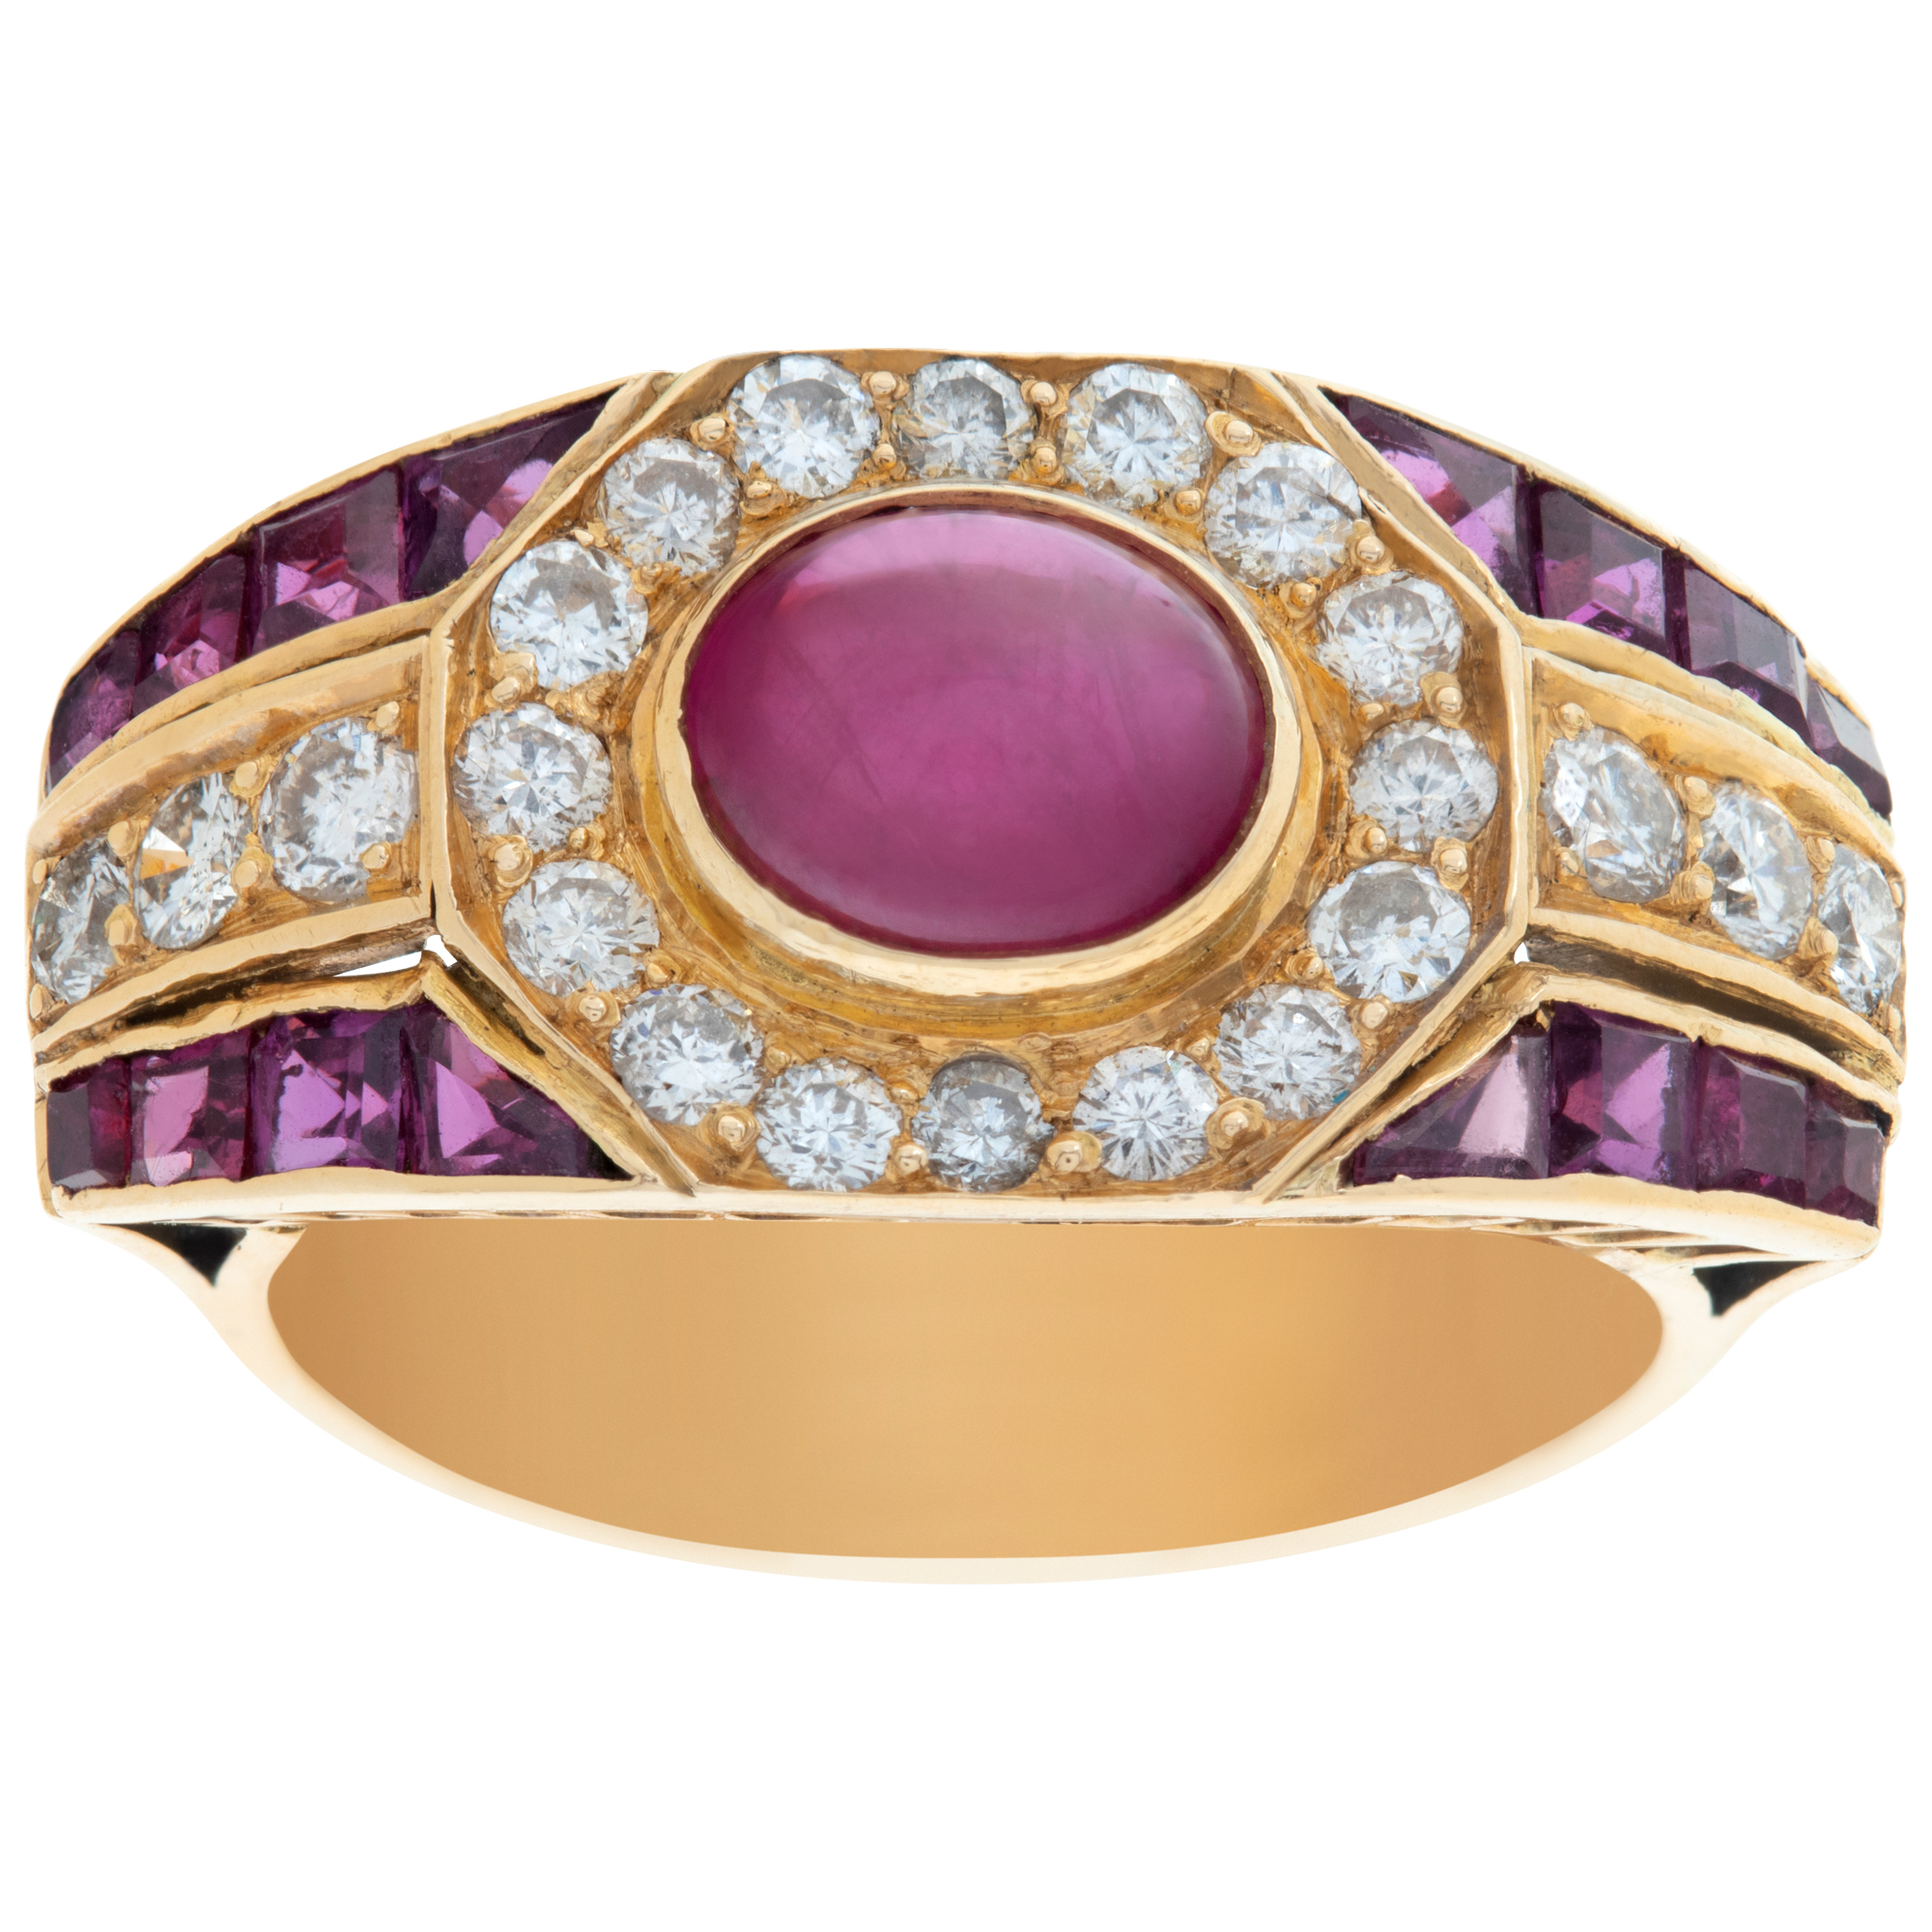 Cabochon ruby and diamond ring in 18k yellow gold. 0.50 carats in diamonds